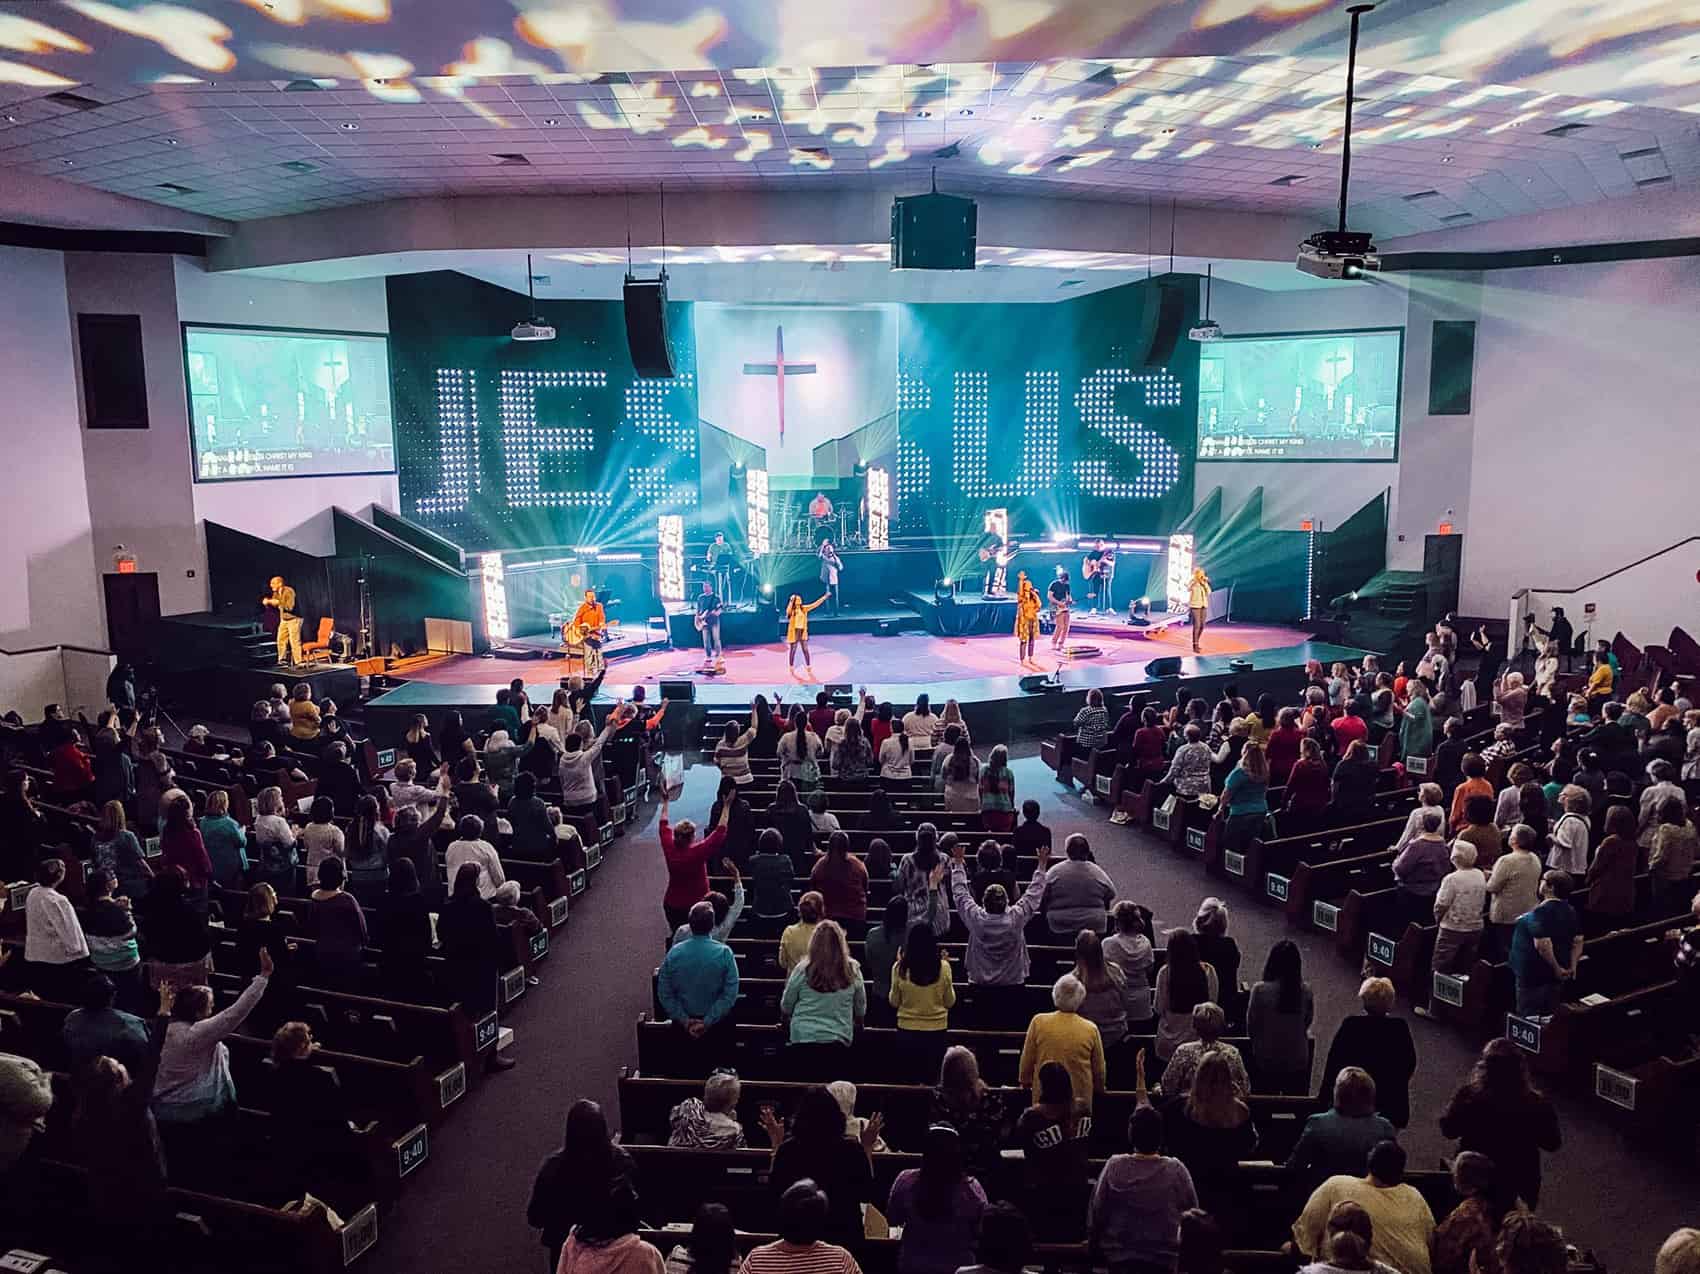 900 gather online and in person for Priority Women’s Conference IBSA News